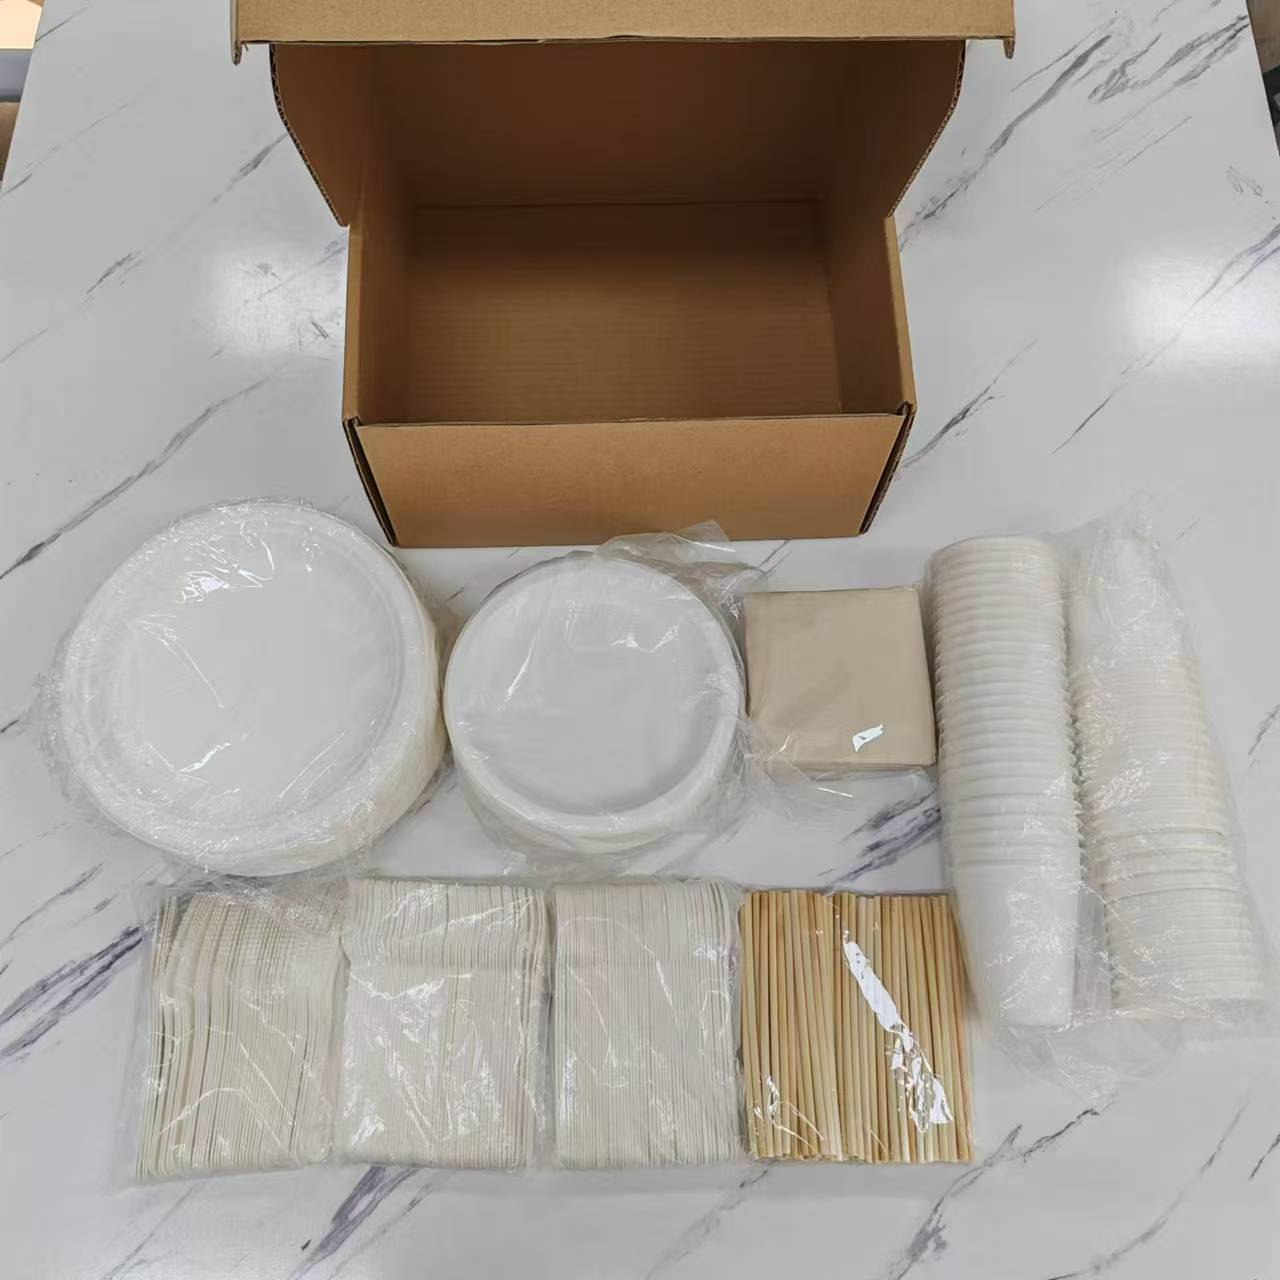 Heavy-duty Disposable Paper Plates